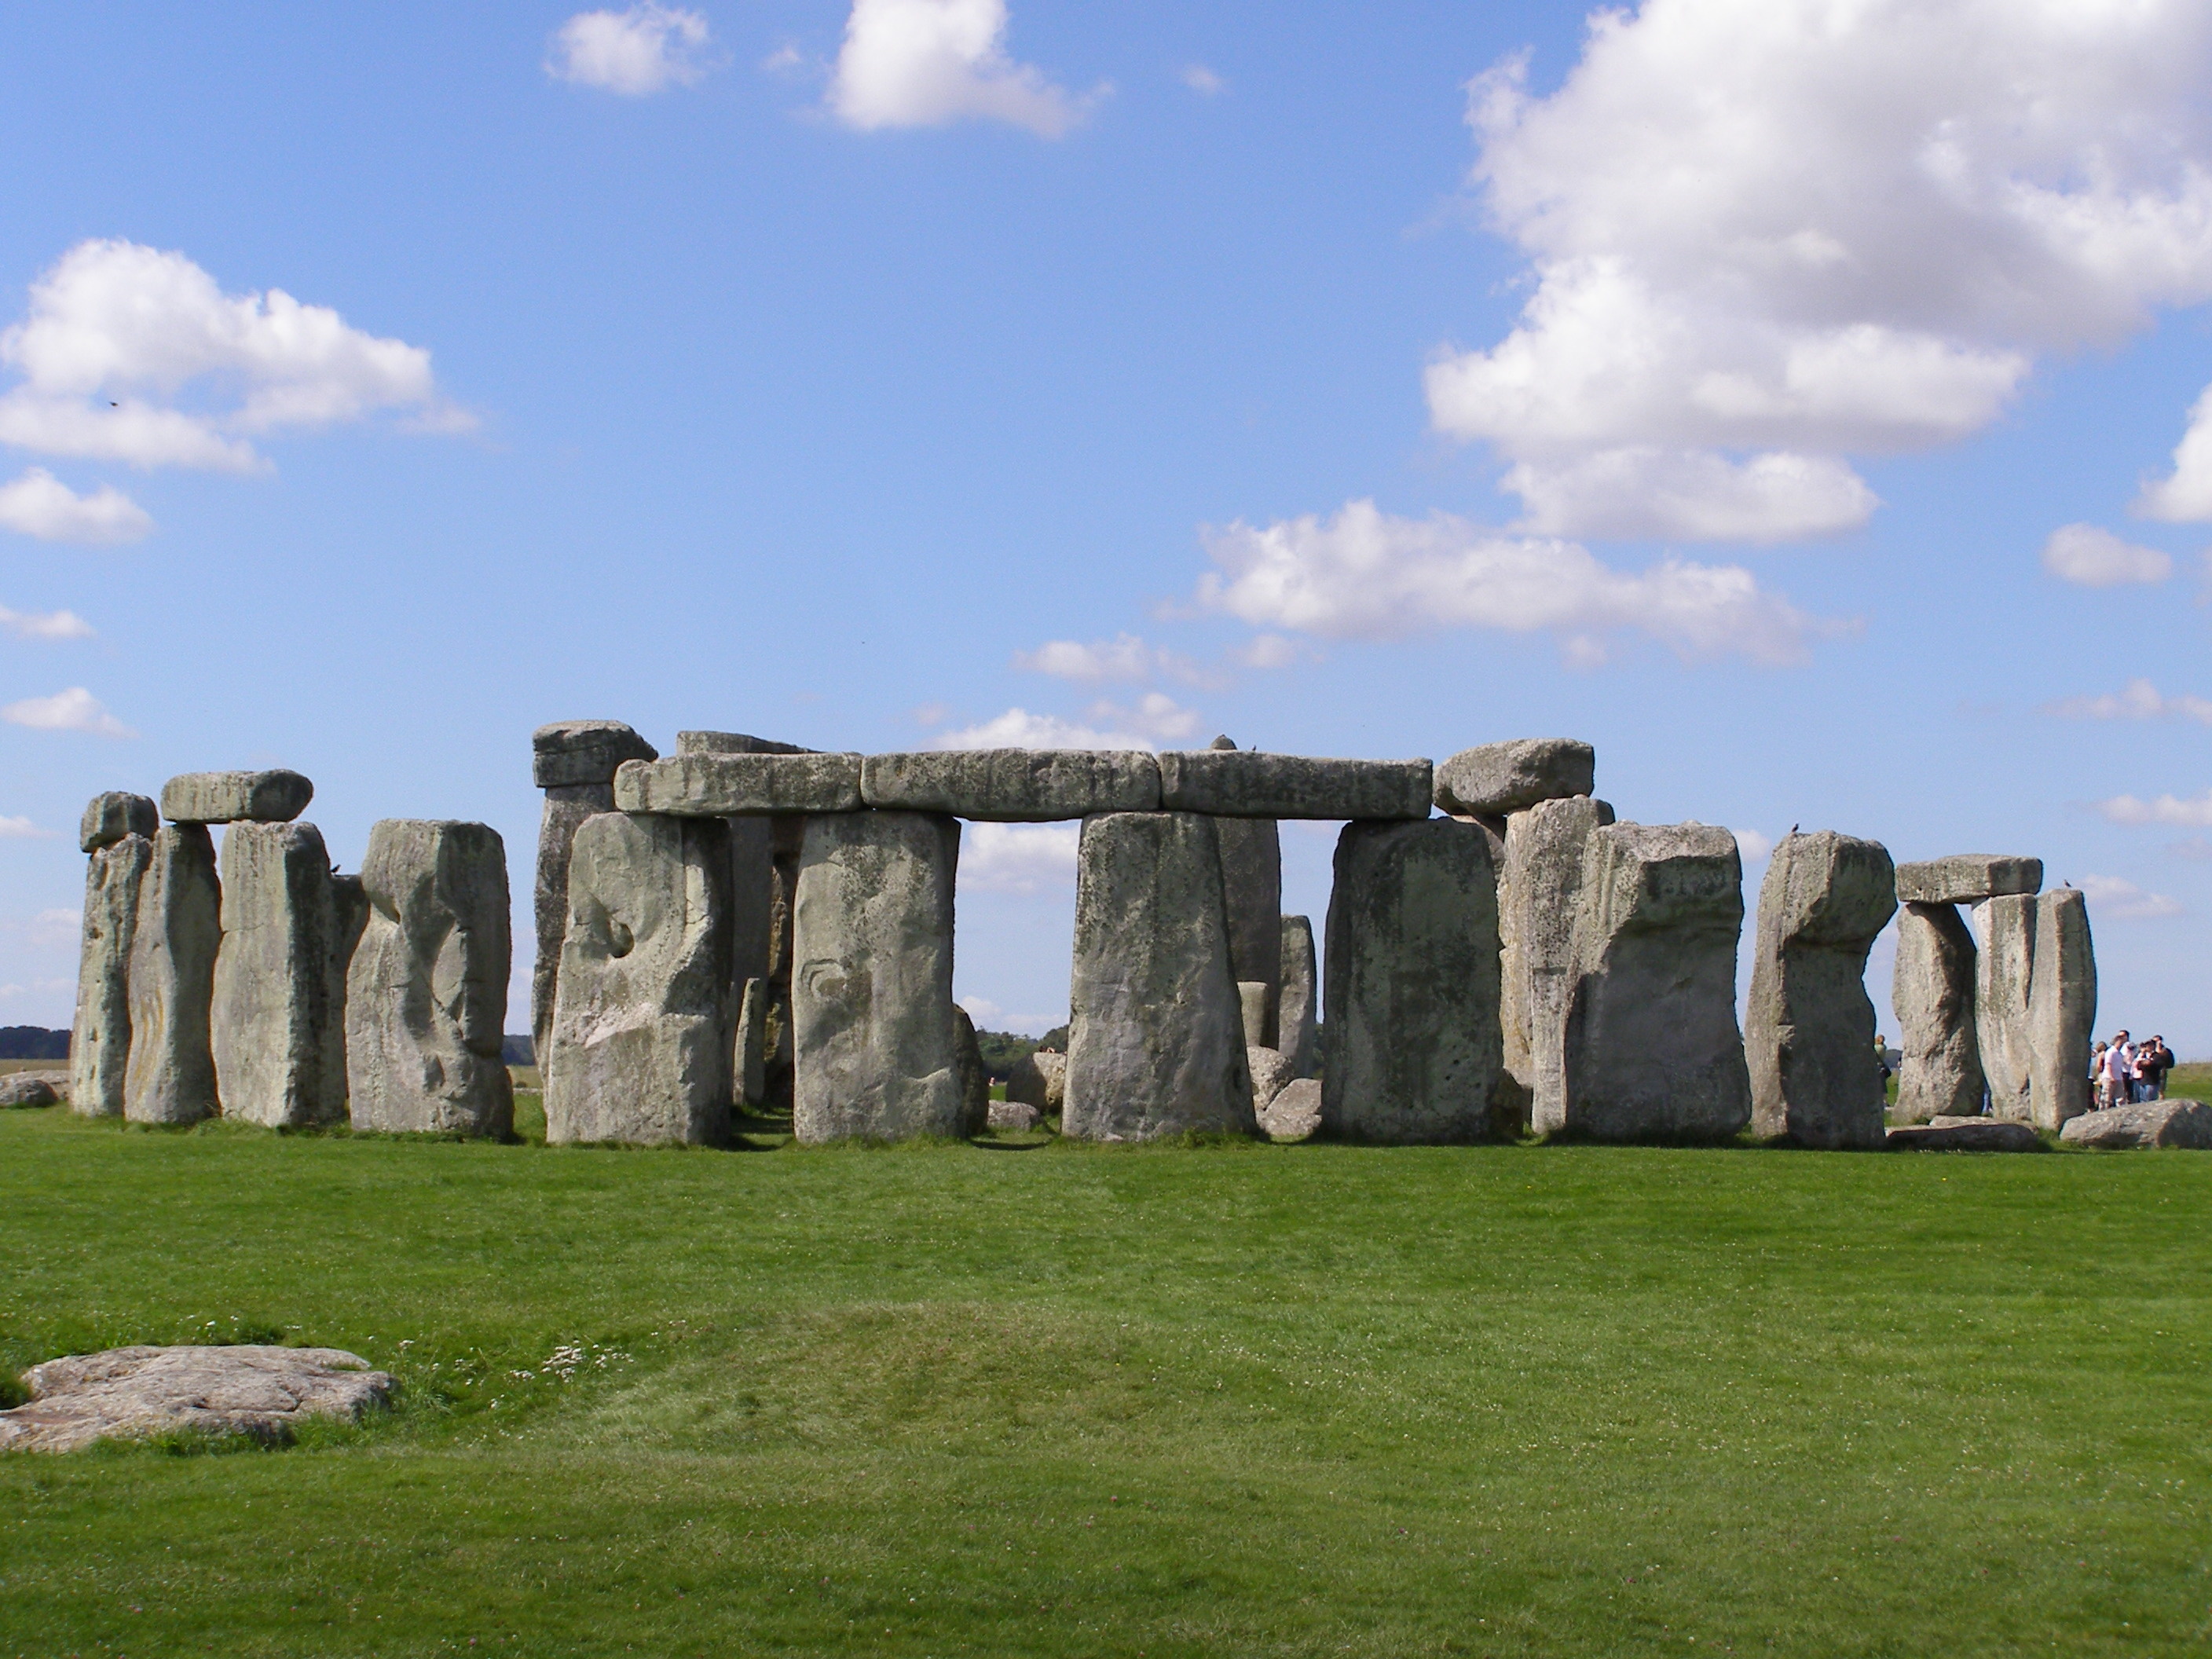 Stonehenge, High resolution wallpapers, HQ pictures, 2820x2120 HD Desktop